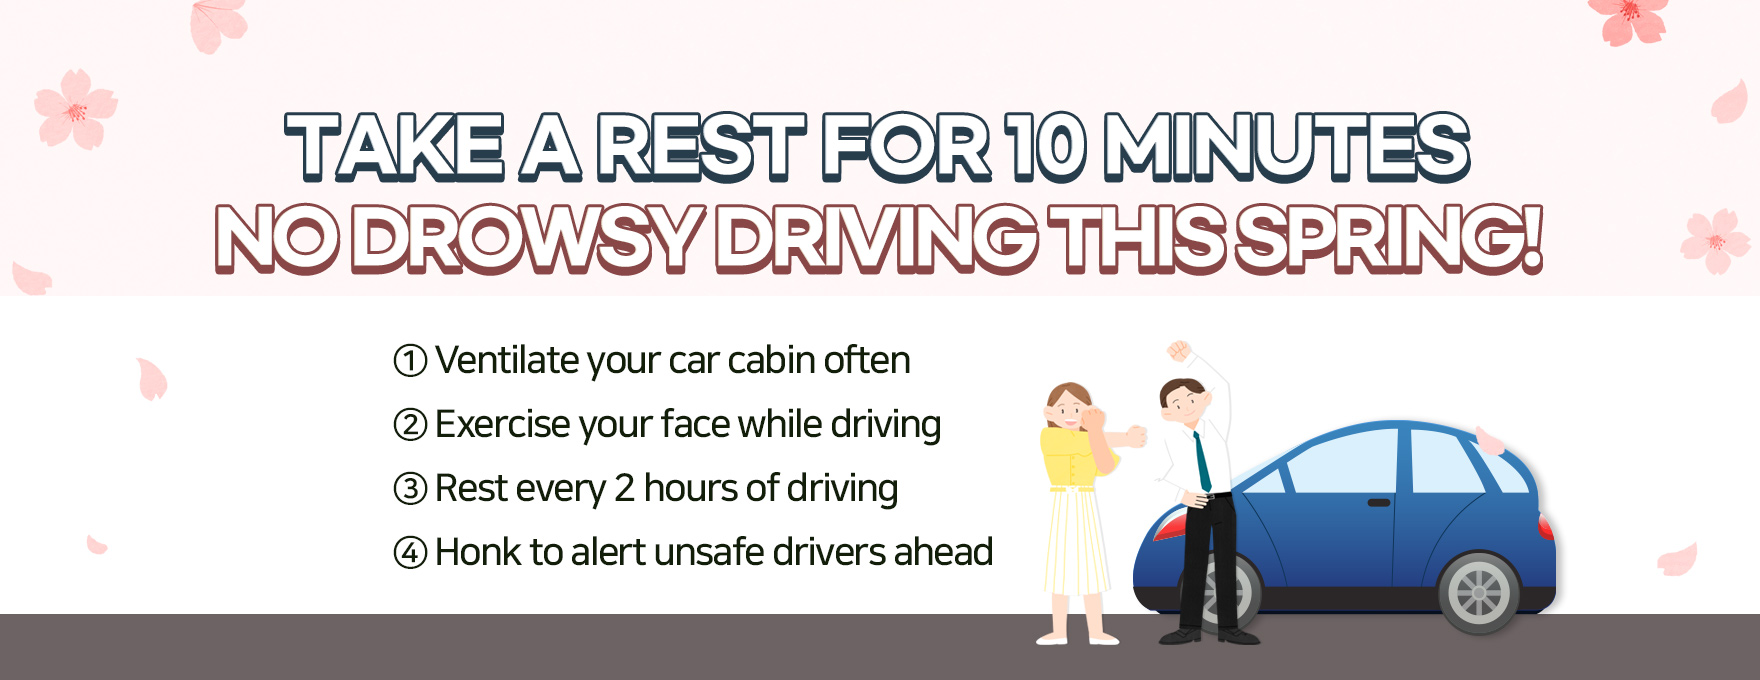 Take a rest for 10 minutes. No drowsy driving this spring!